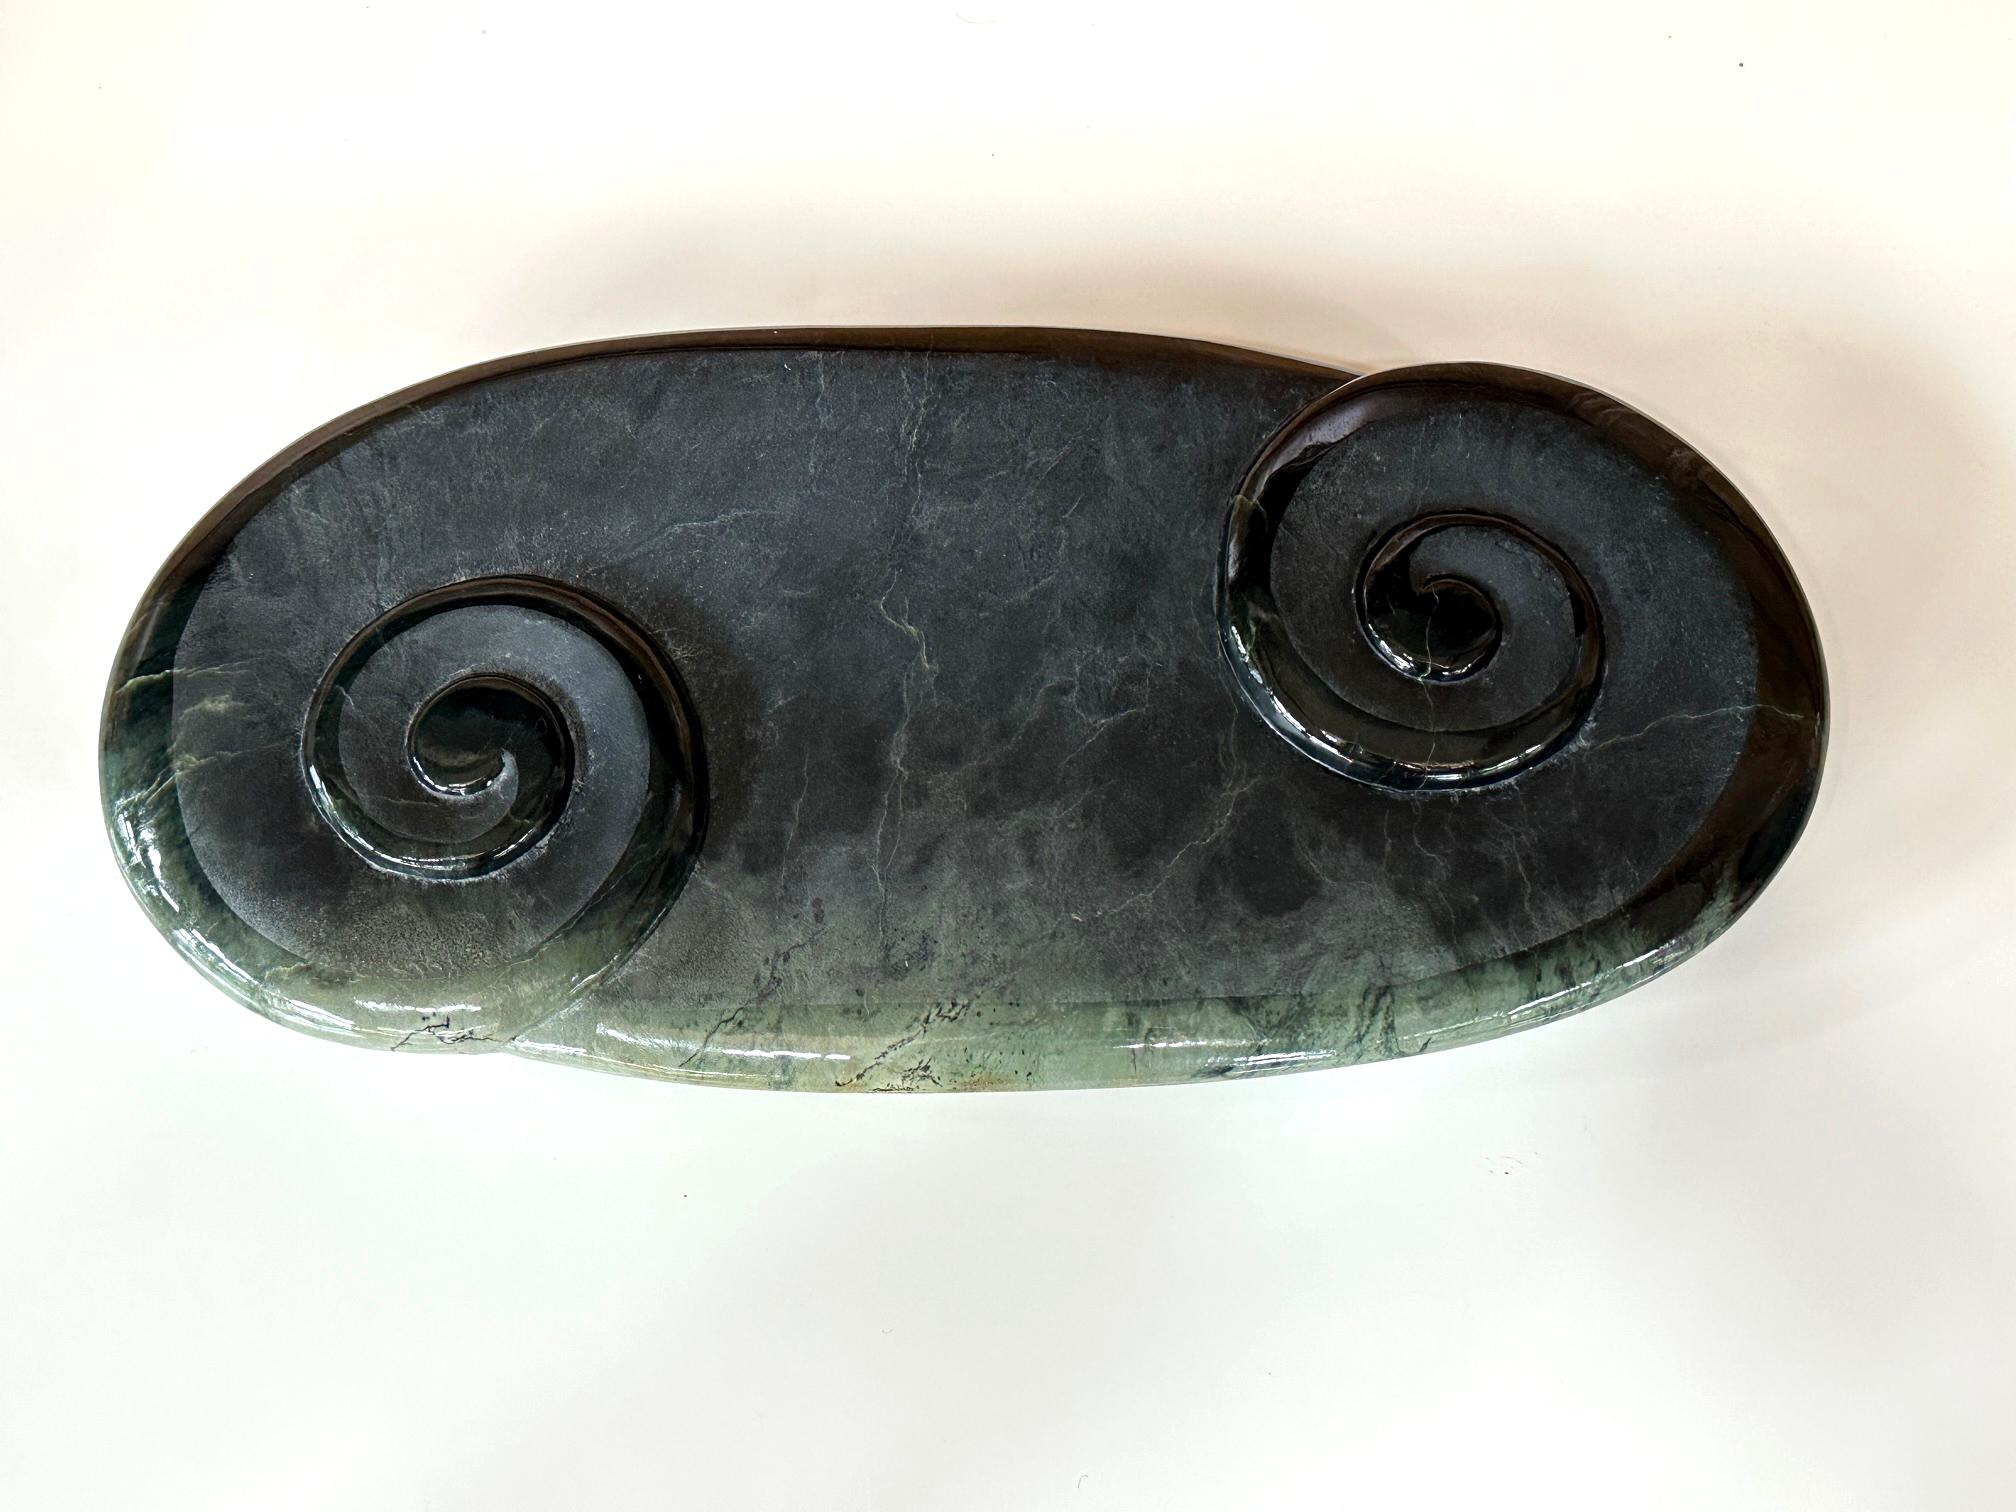 An impressively large jade sculpture for table or desktop. In Māori style from New Zealand, the heavy jade Nephrite slab (also known as “pounamu”) was carved and polished into the 